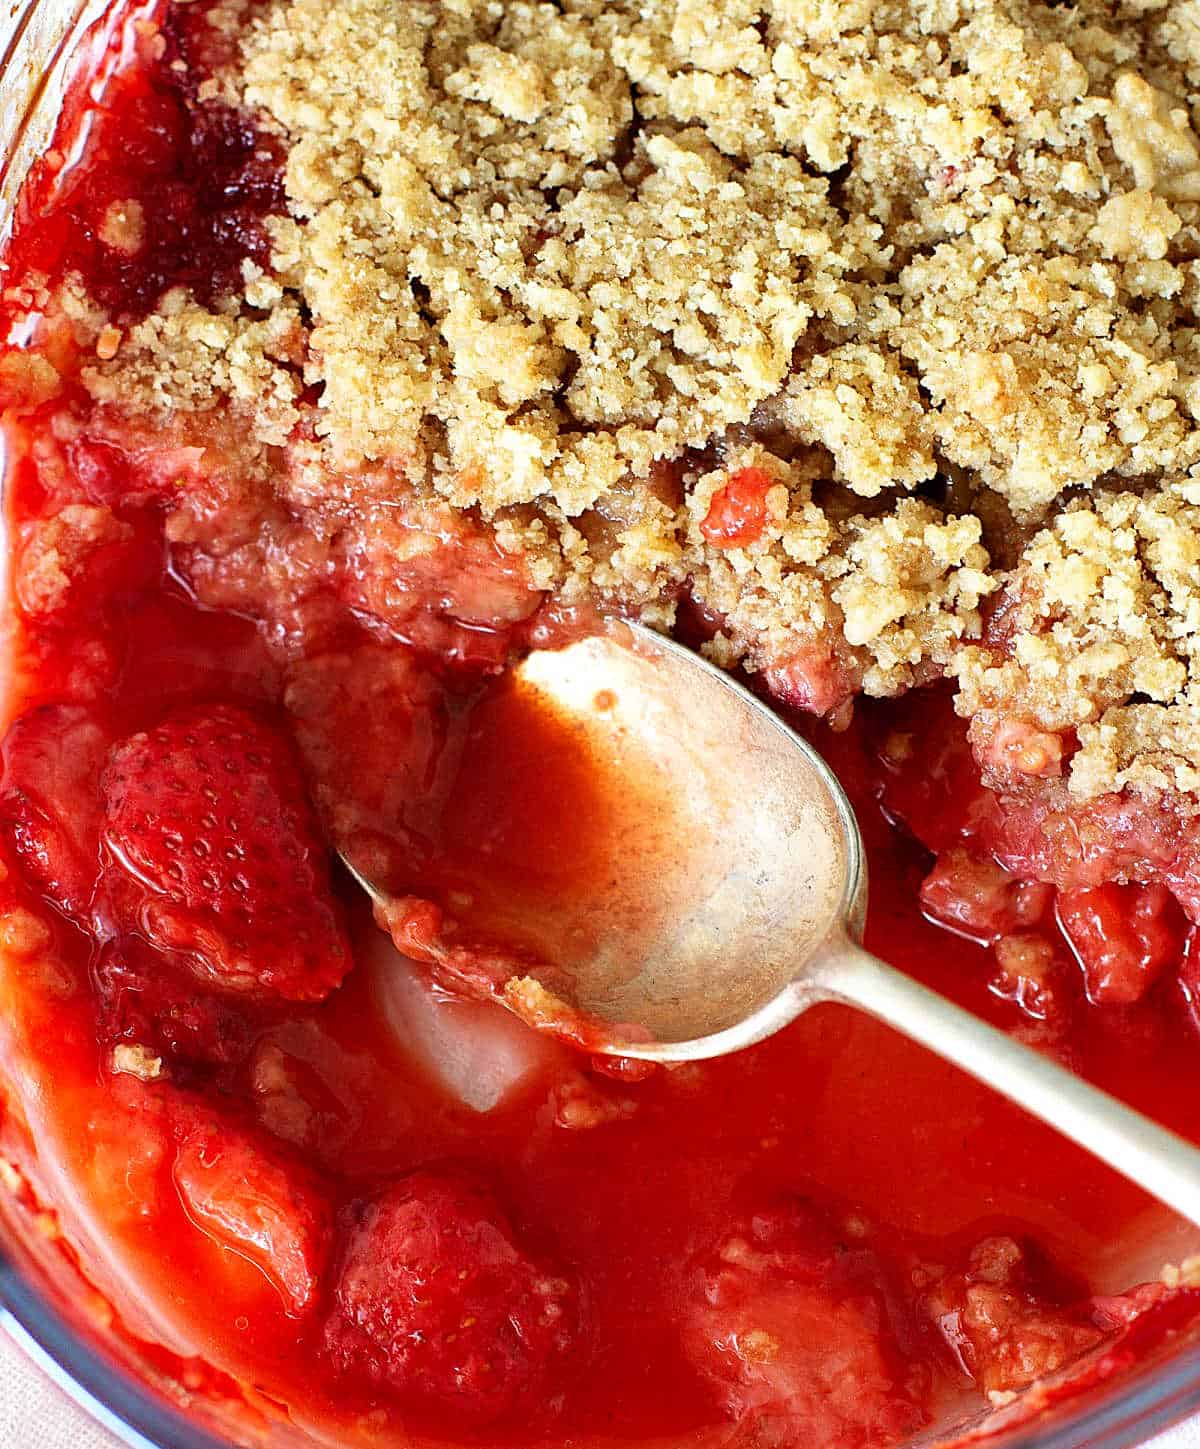 Silver spoon in pool of strawberry crisp on glass dish